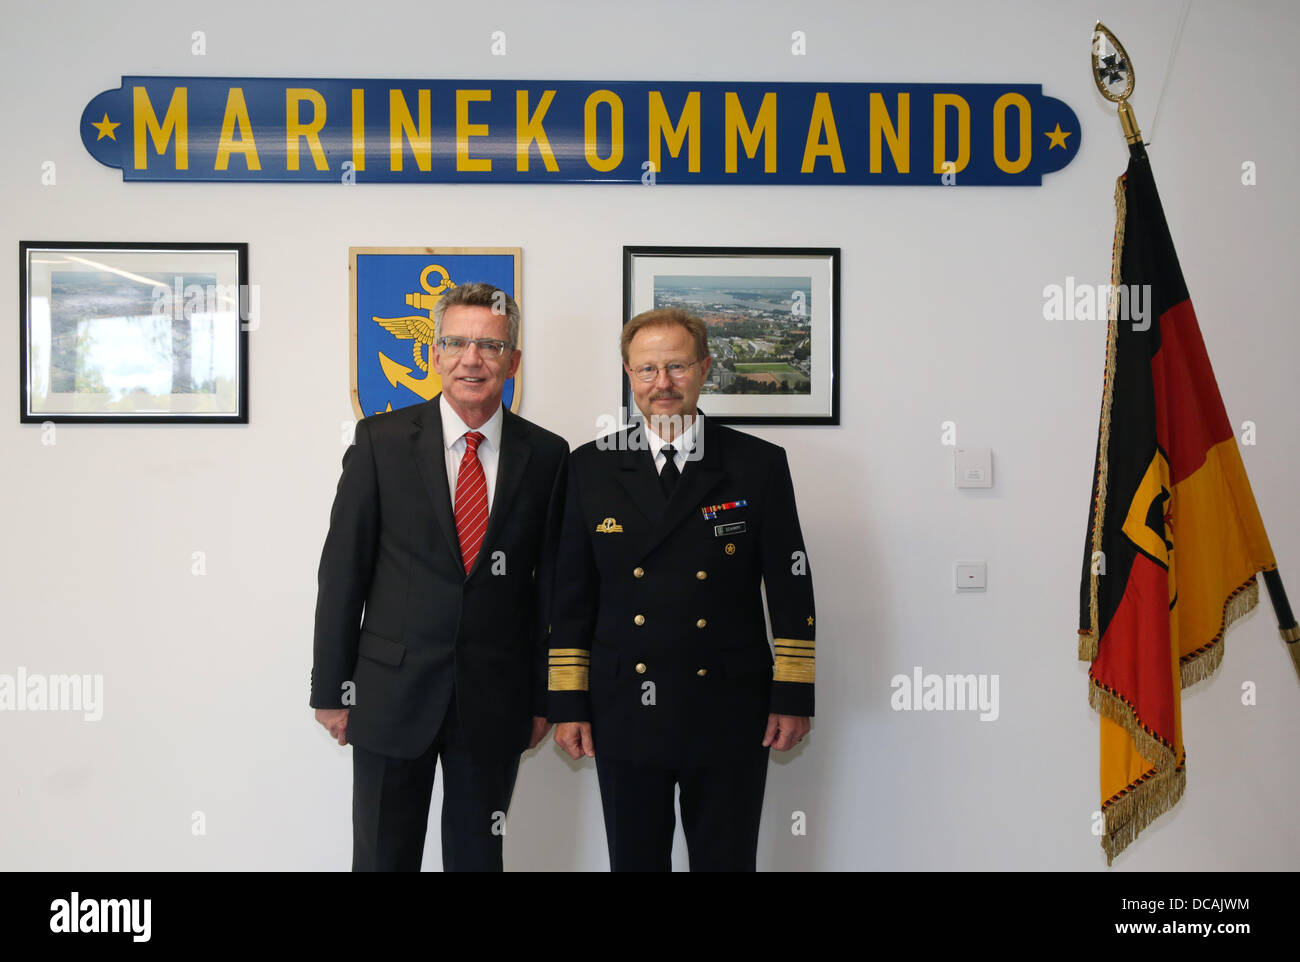 Rostock, Germany. 14th Aug, 2013. German Defence Minister Thomas de Maiziere (L) is greeted by command chief Vice Admiral Axel Schimpf (R) at the German Navy Command in Rostock, Germany, 14 August 2013. The minister is visiting the command as part of his summer tour. Photo: BERND WUESTNECK/dpa/Alamy Live News Stock Photo